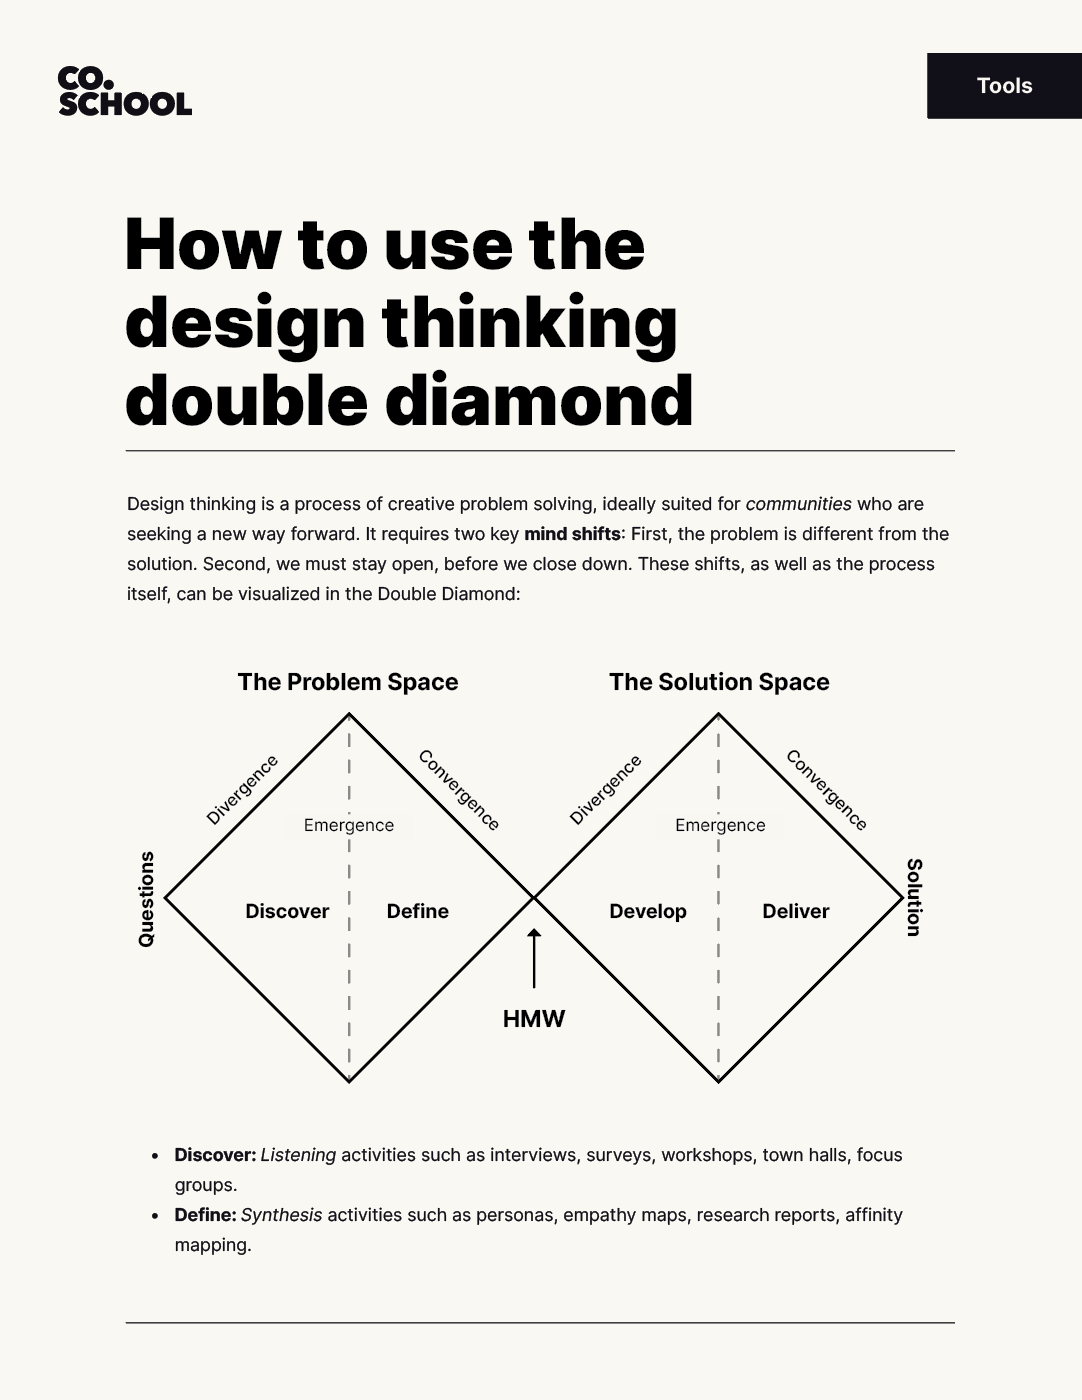 Cover image of the design thinking double diamond tool